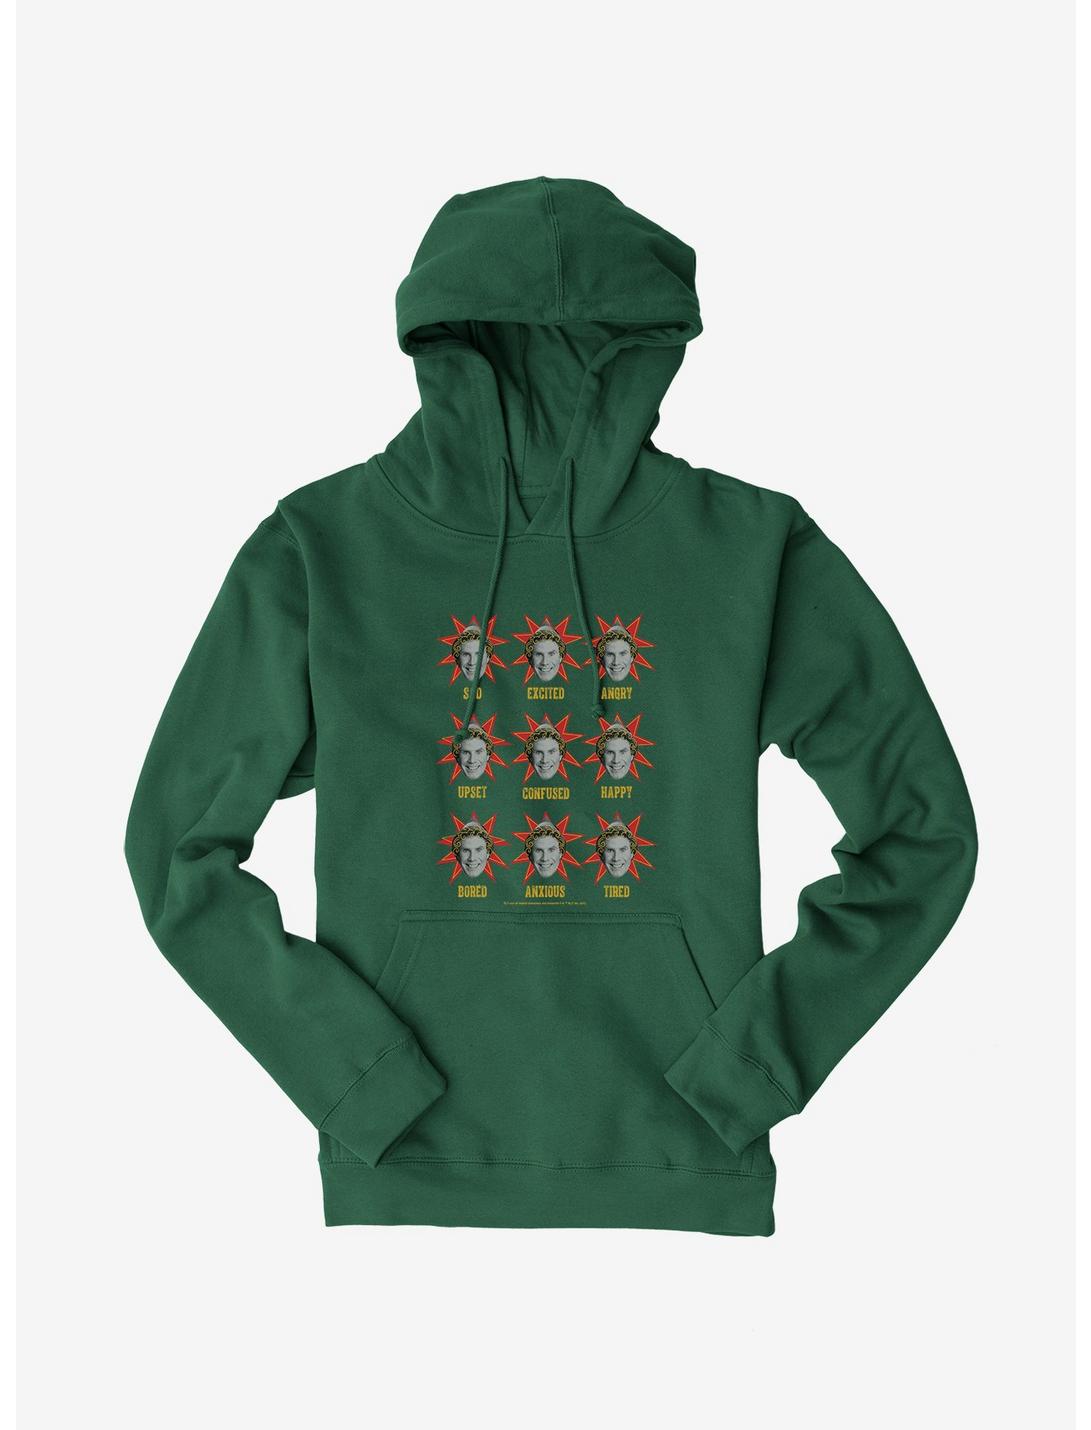 Elf Buddy Emotions Chart Hoodie, FOREST, hi-res